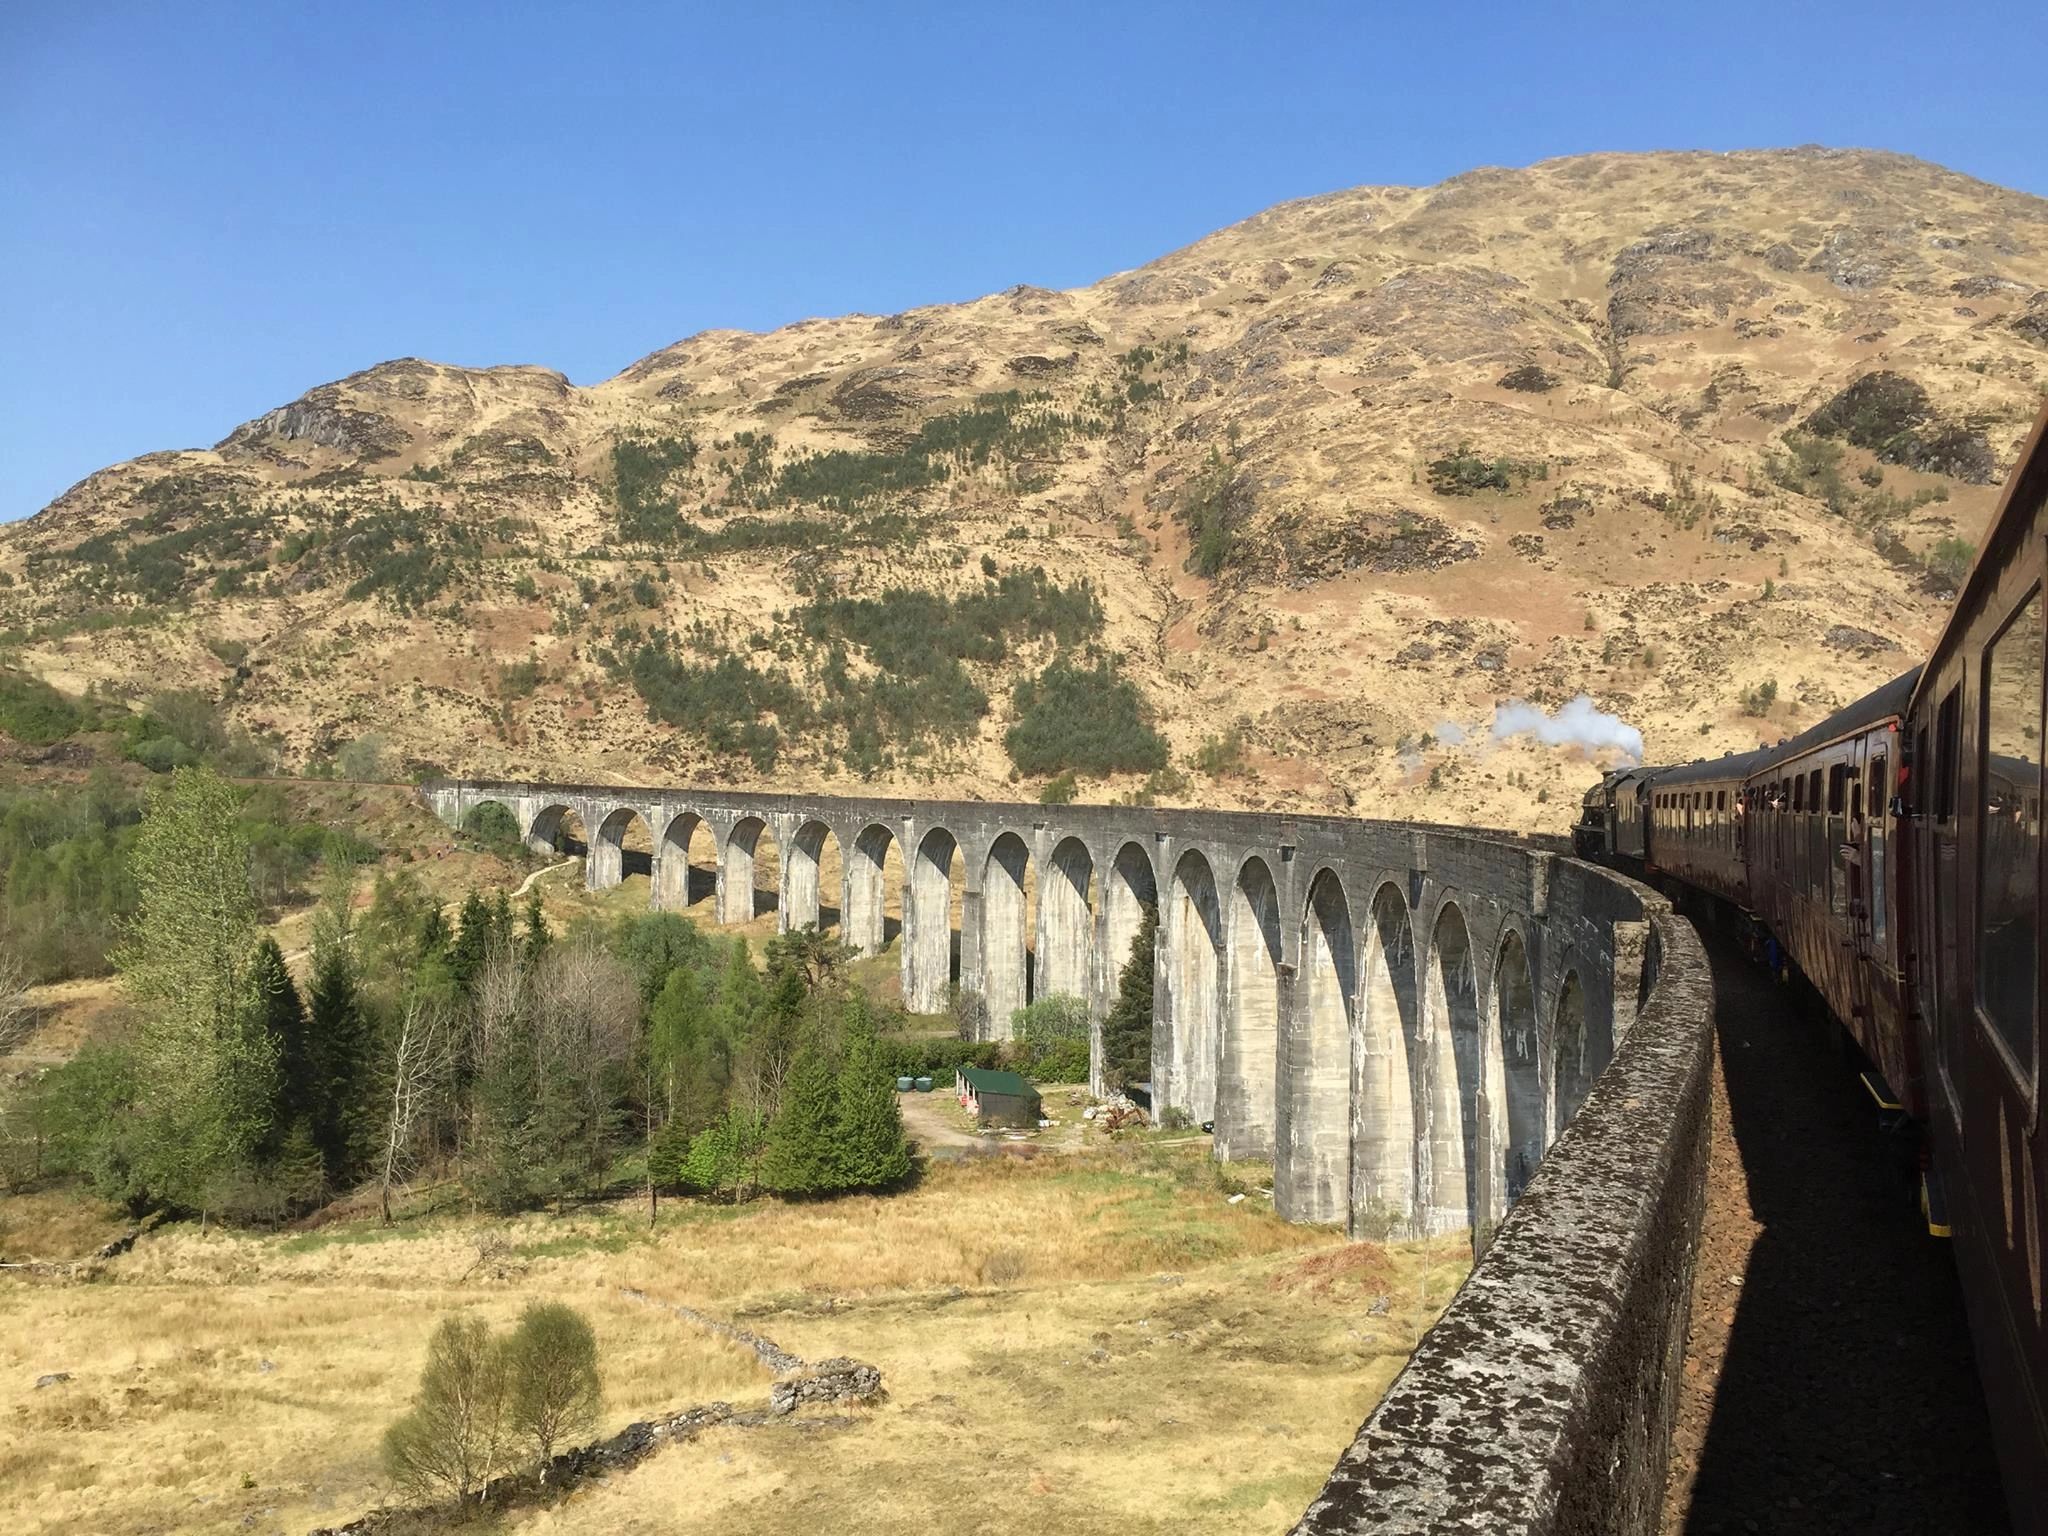 The jacobite Steam Train travelling over Glenfinnan Viaduct or harry Potter bridge and blue skies